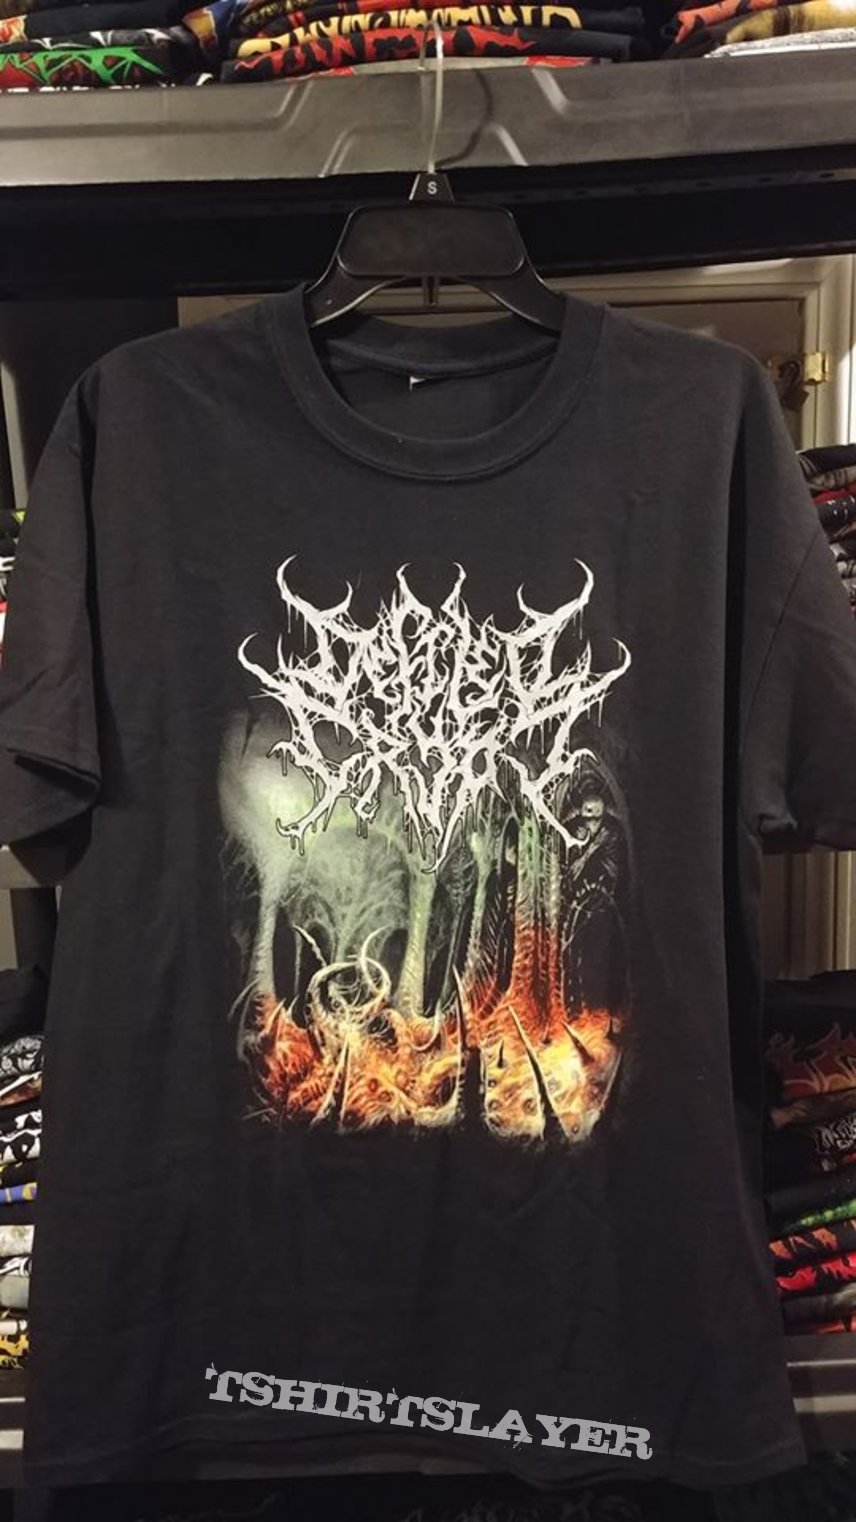 Defiled Crypt t-shirt